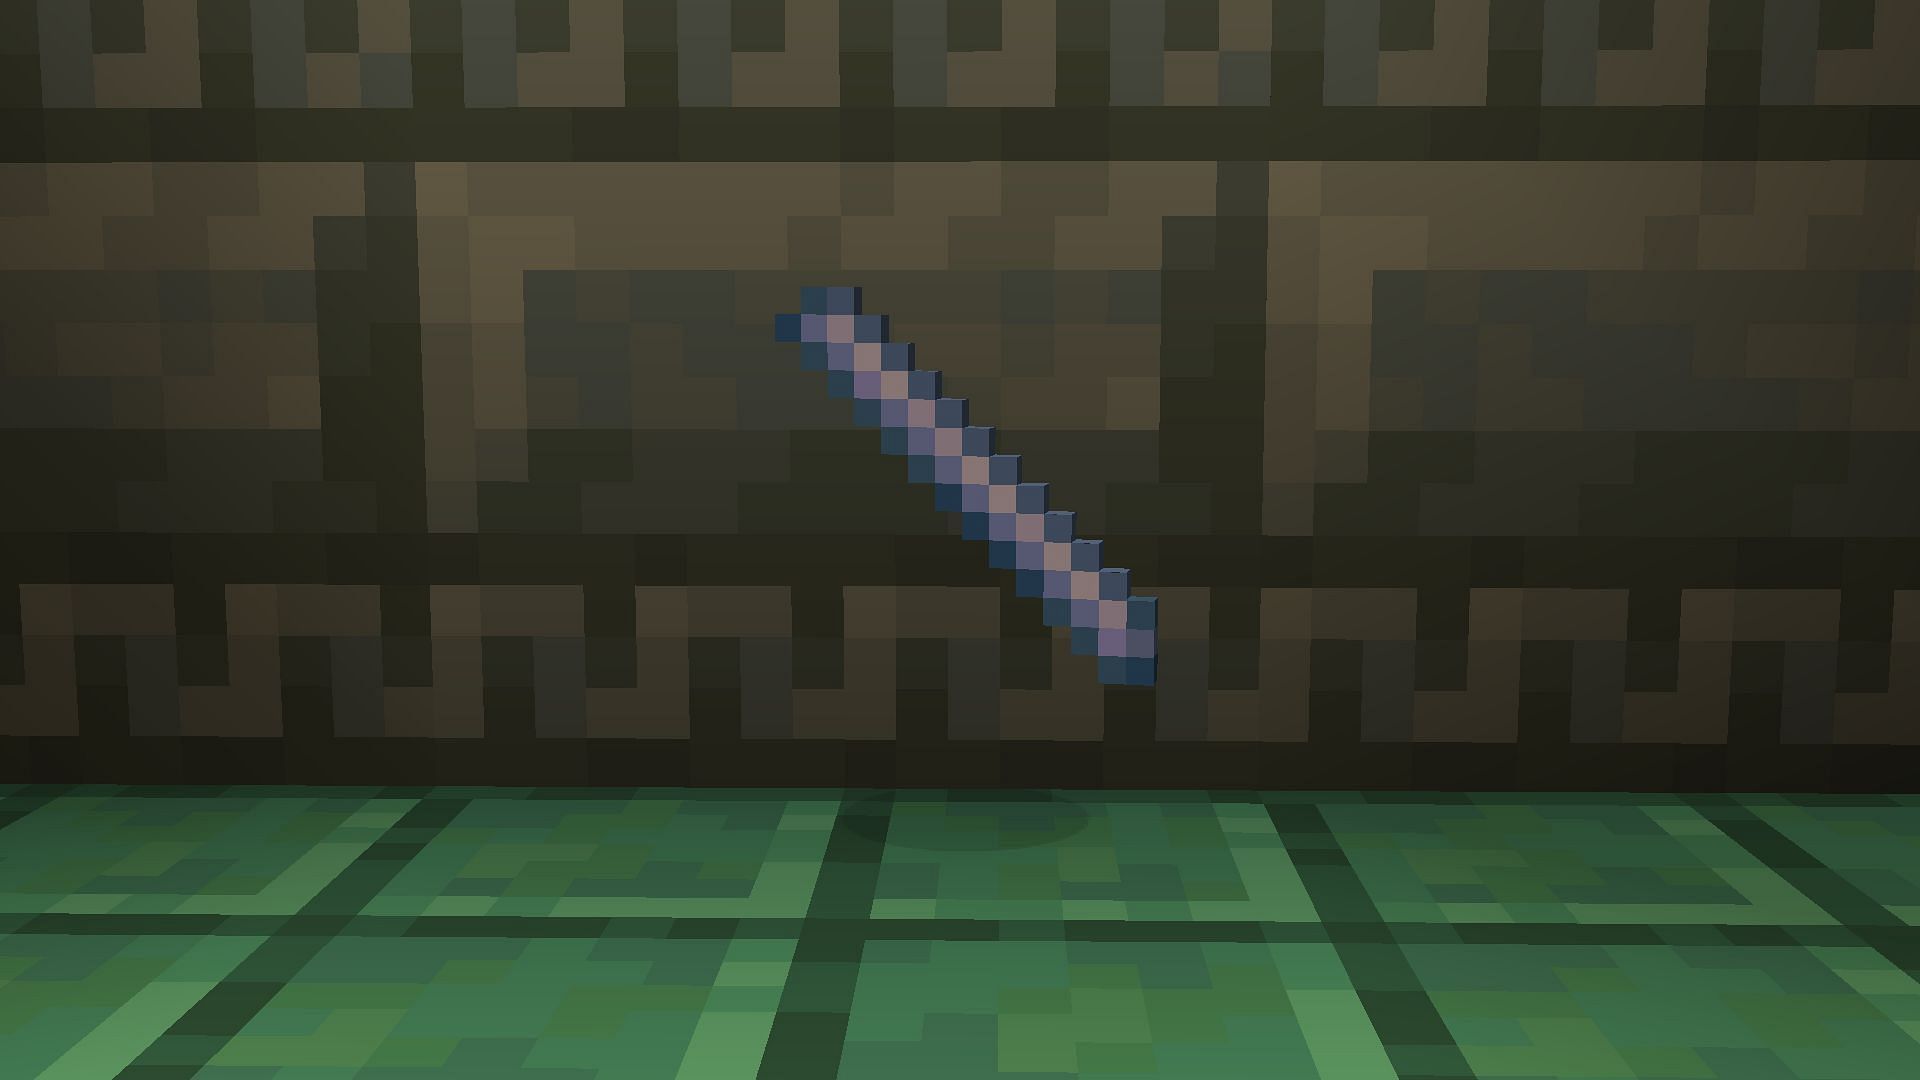 Breeze rod is a new item that can be obtained after defeating breeze mob (Image via Mojang Studios)